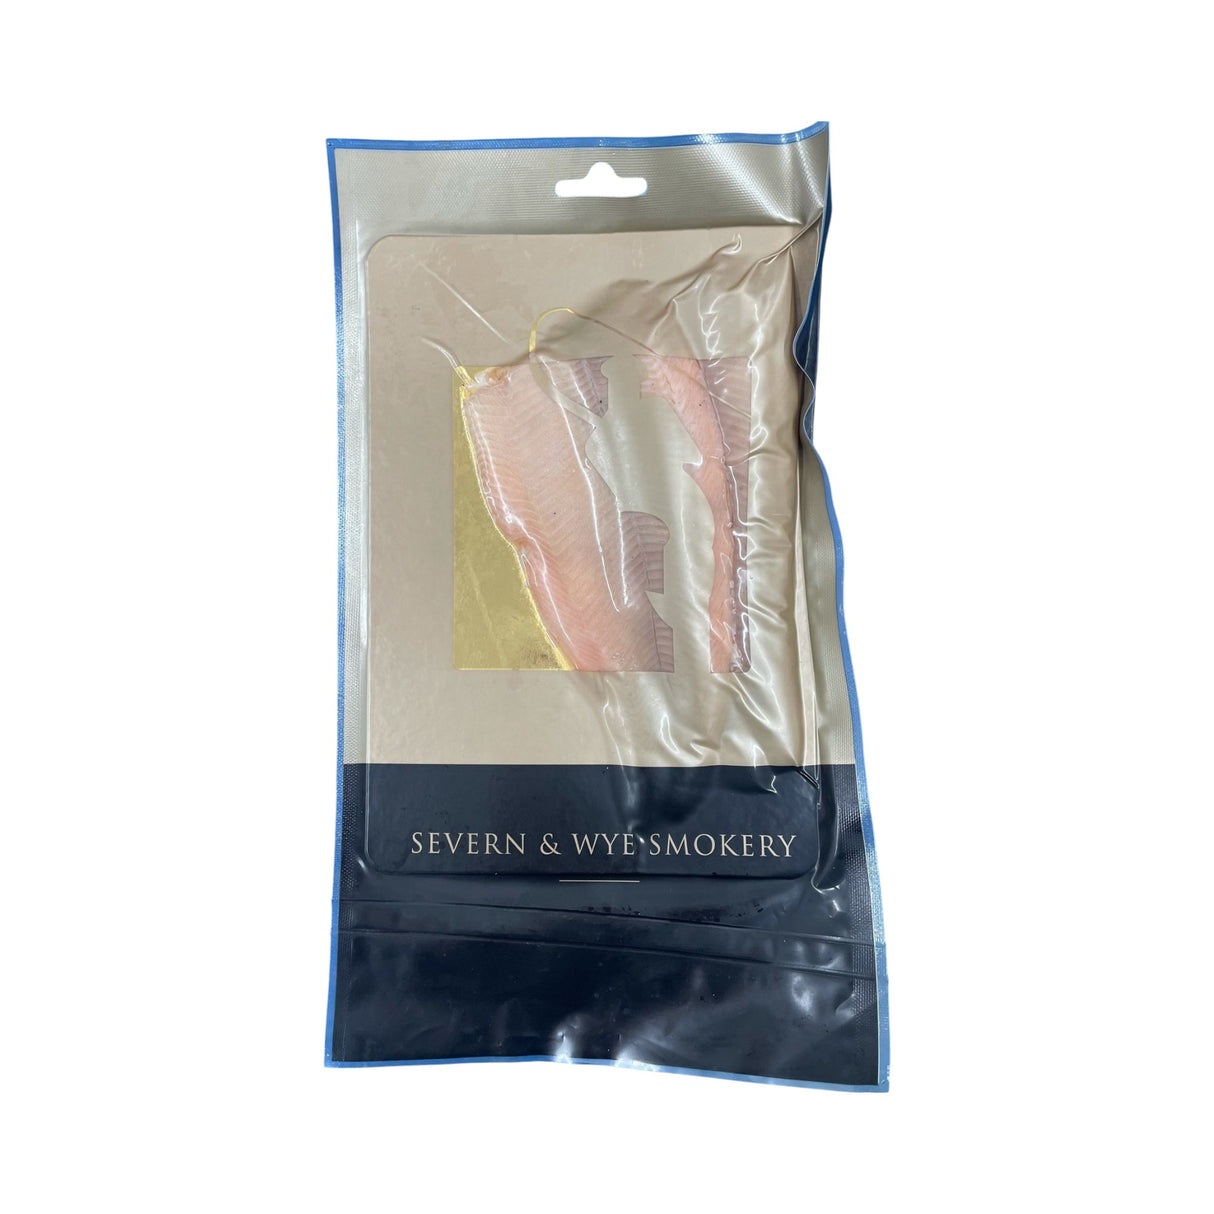 Severn & Wye - Smoked Trout Fillets (2's) 160g